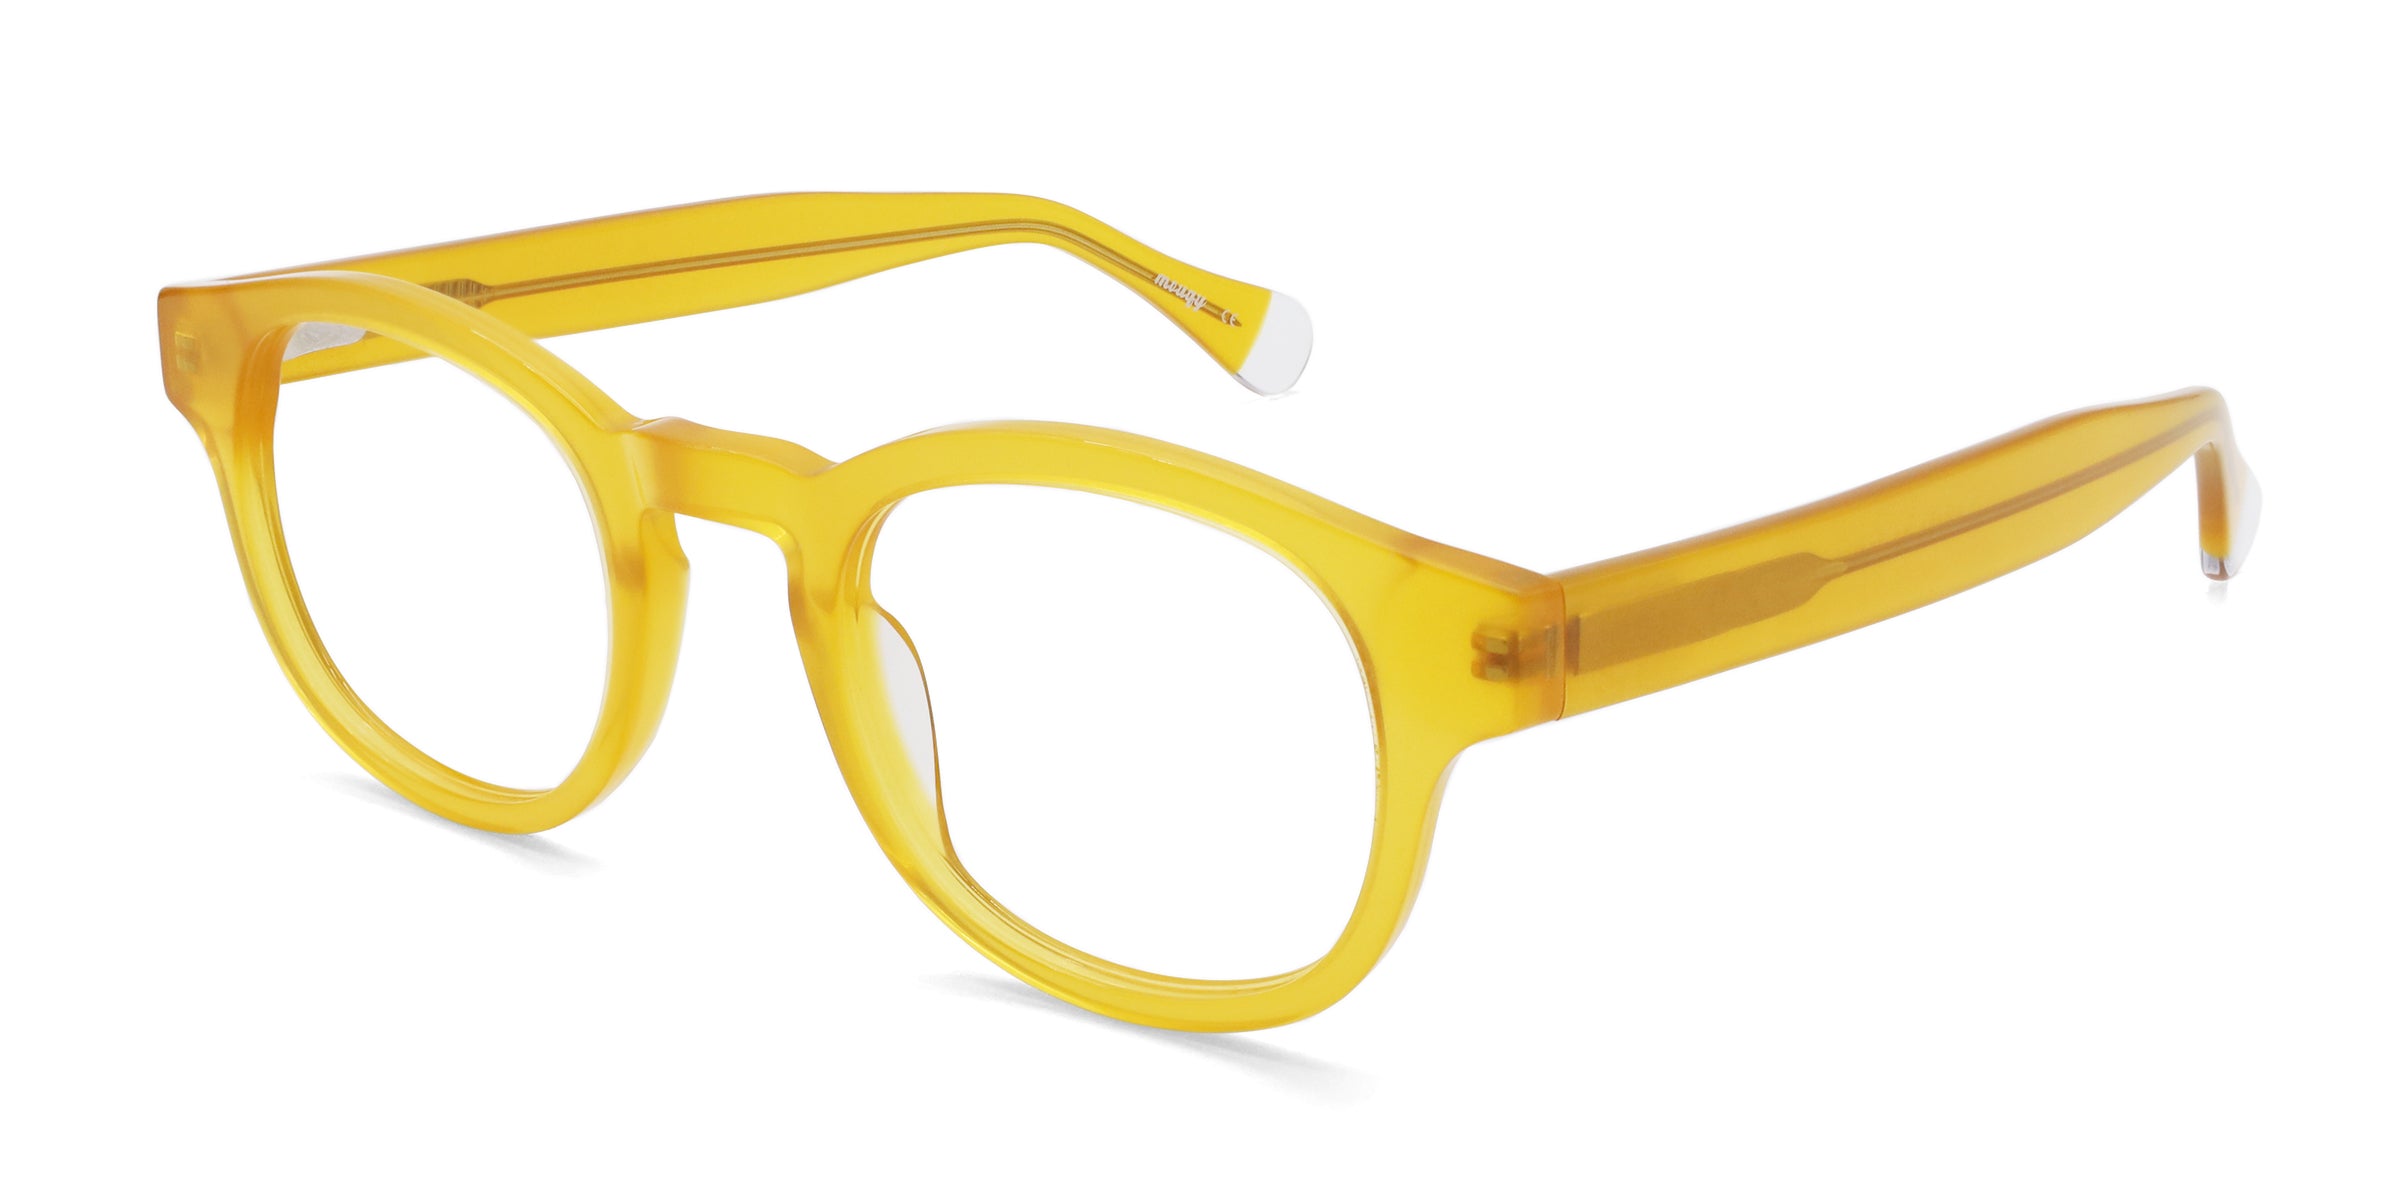 Murphy Square Yellow eyeglasses frames angled view